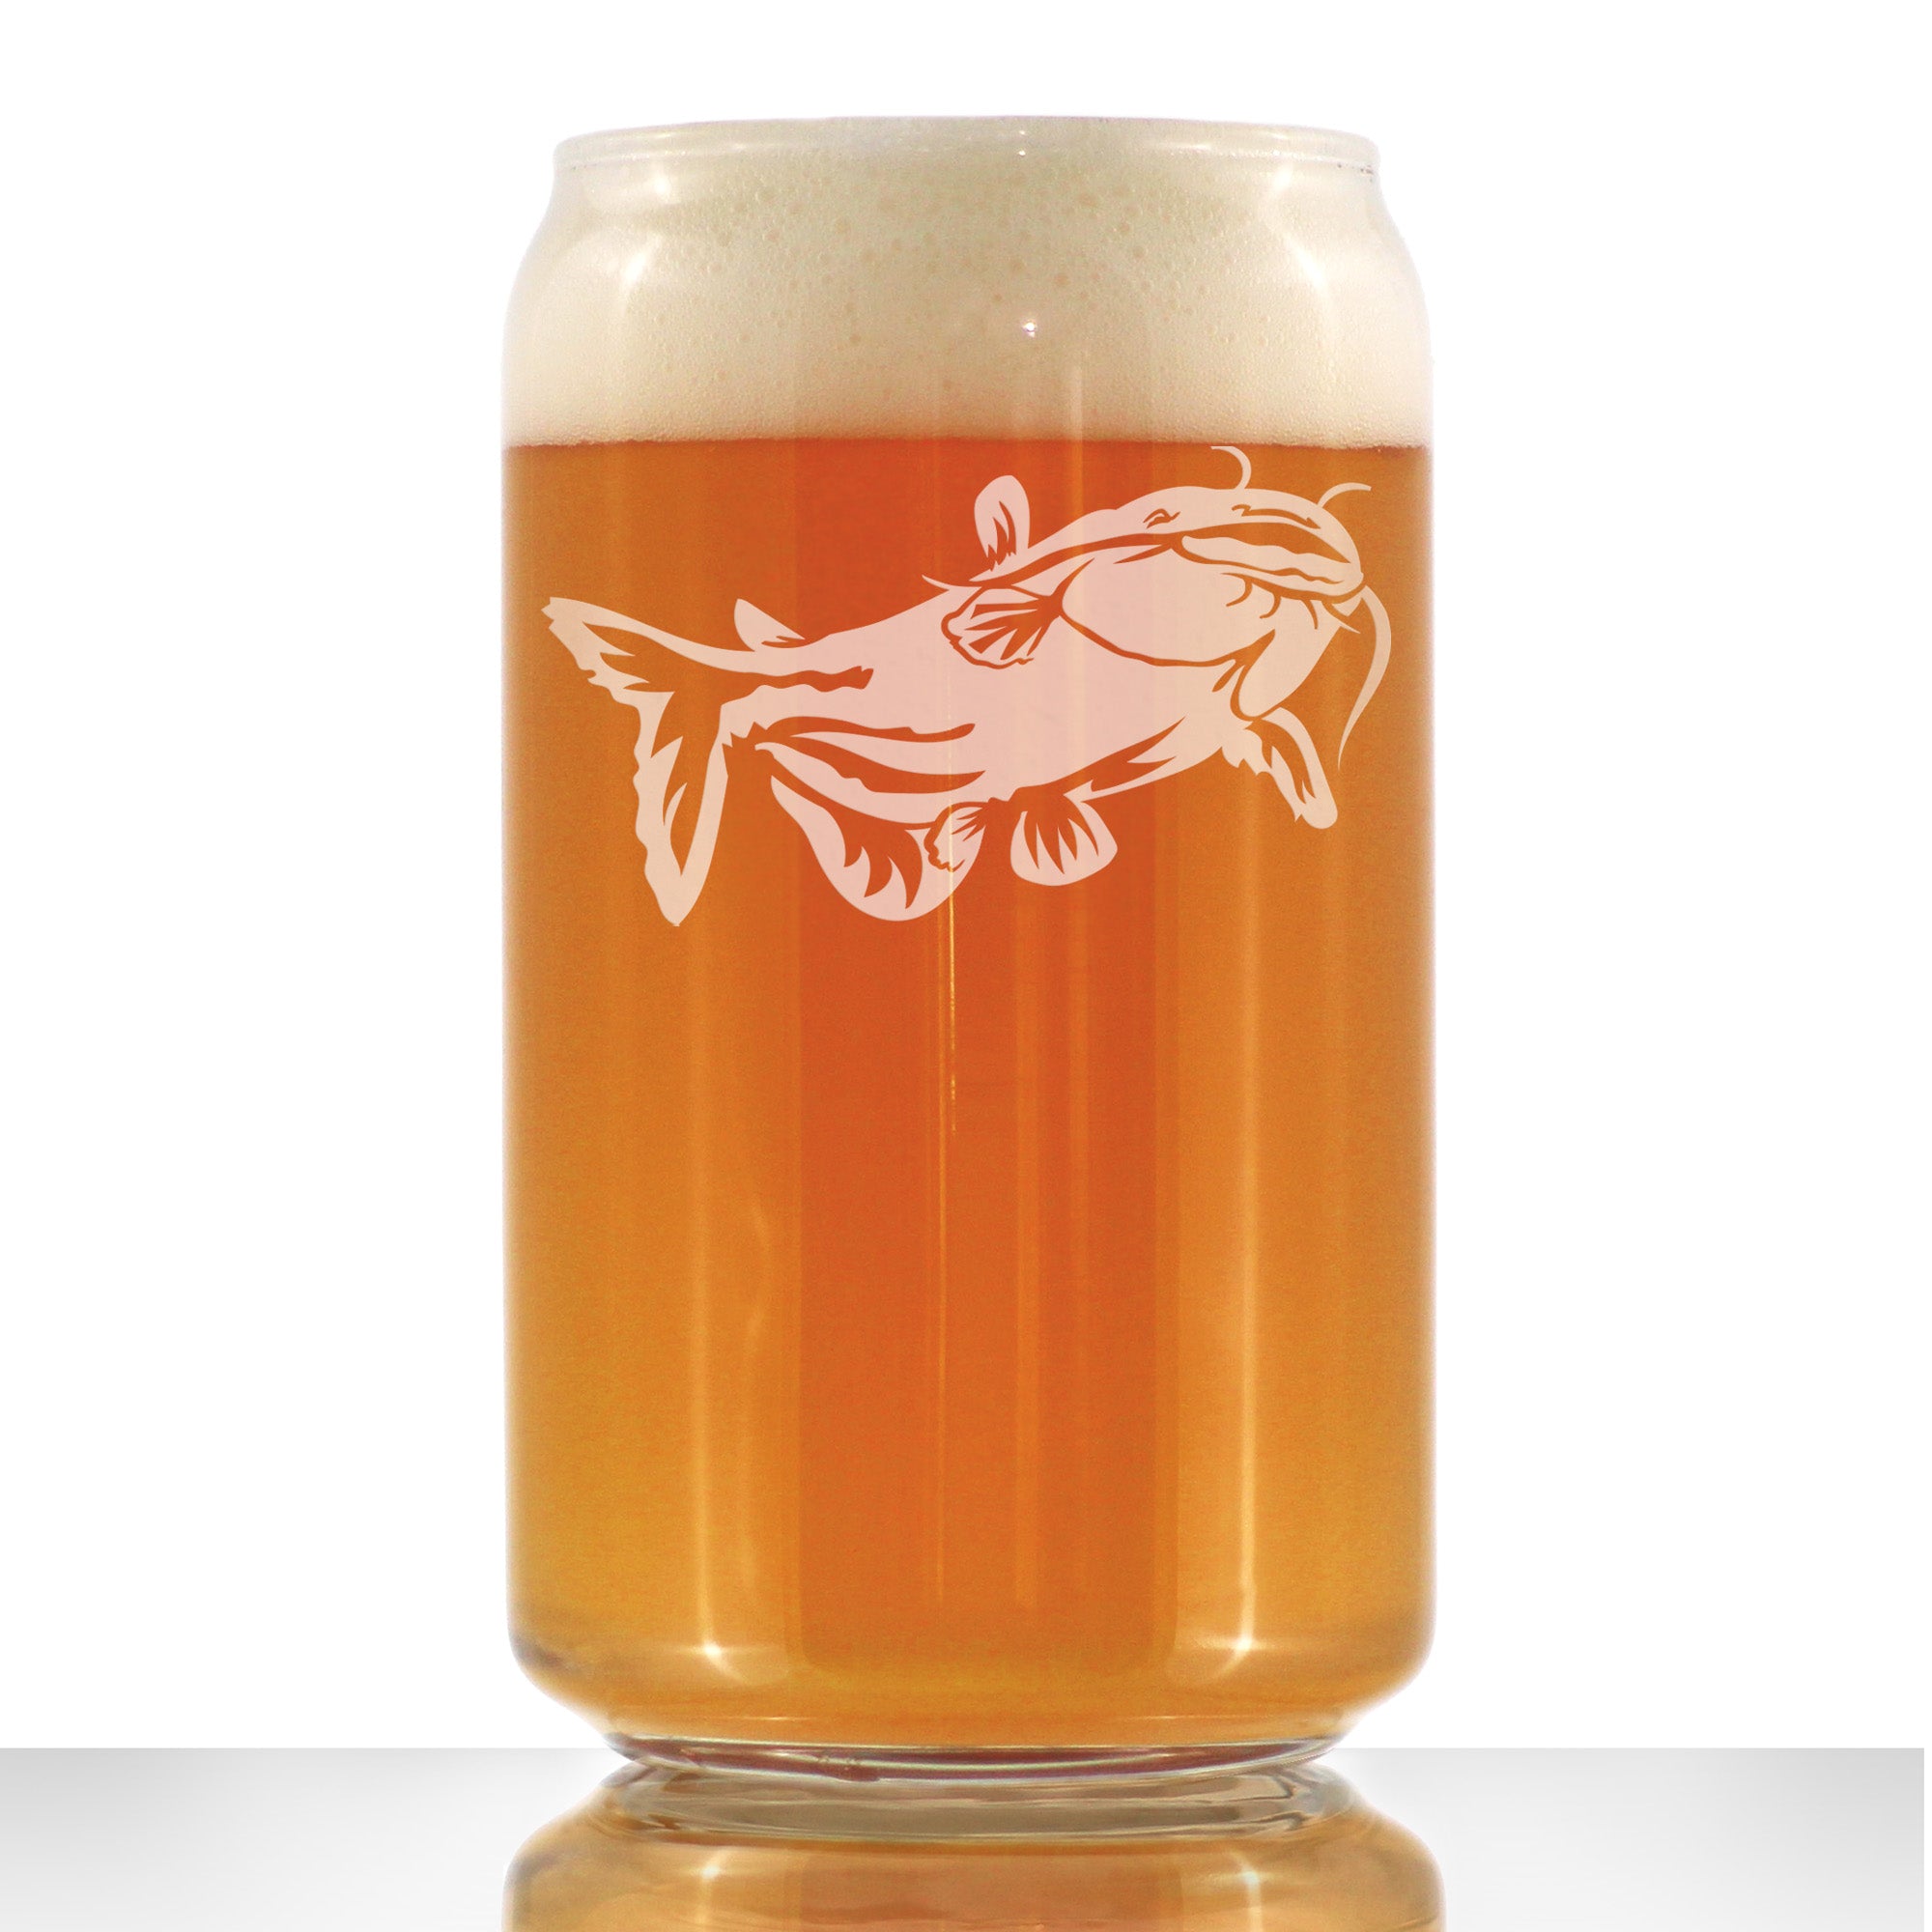 Catfish - Pint Glass for Beer - Catfishing Gifts for Fisherman